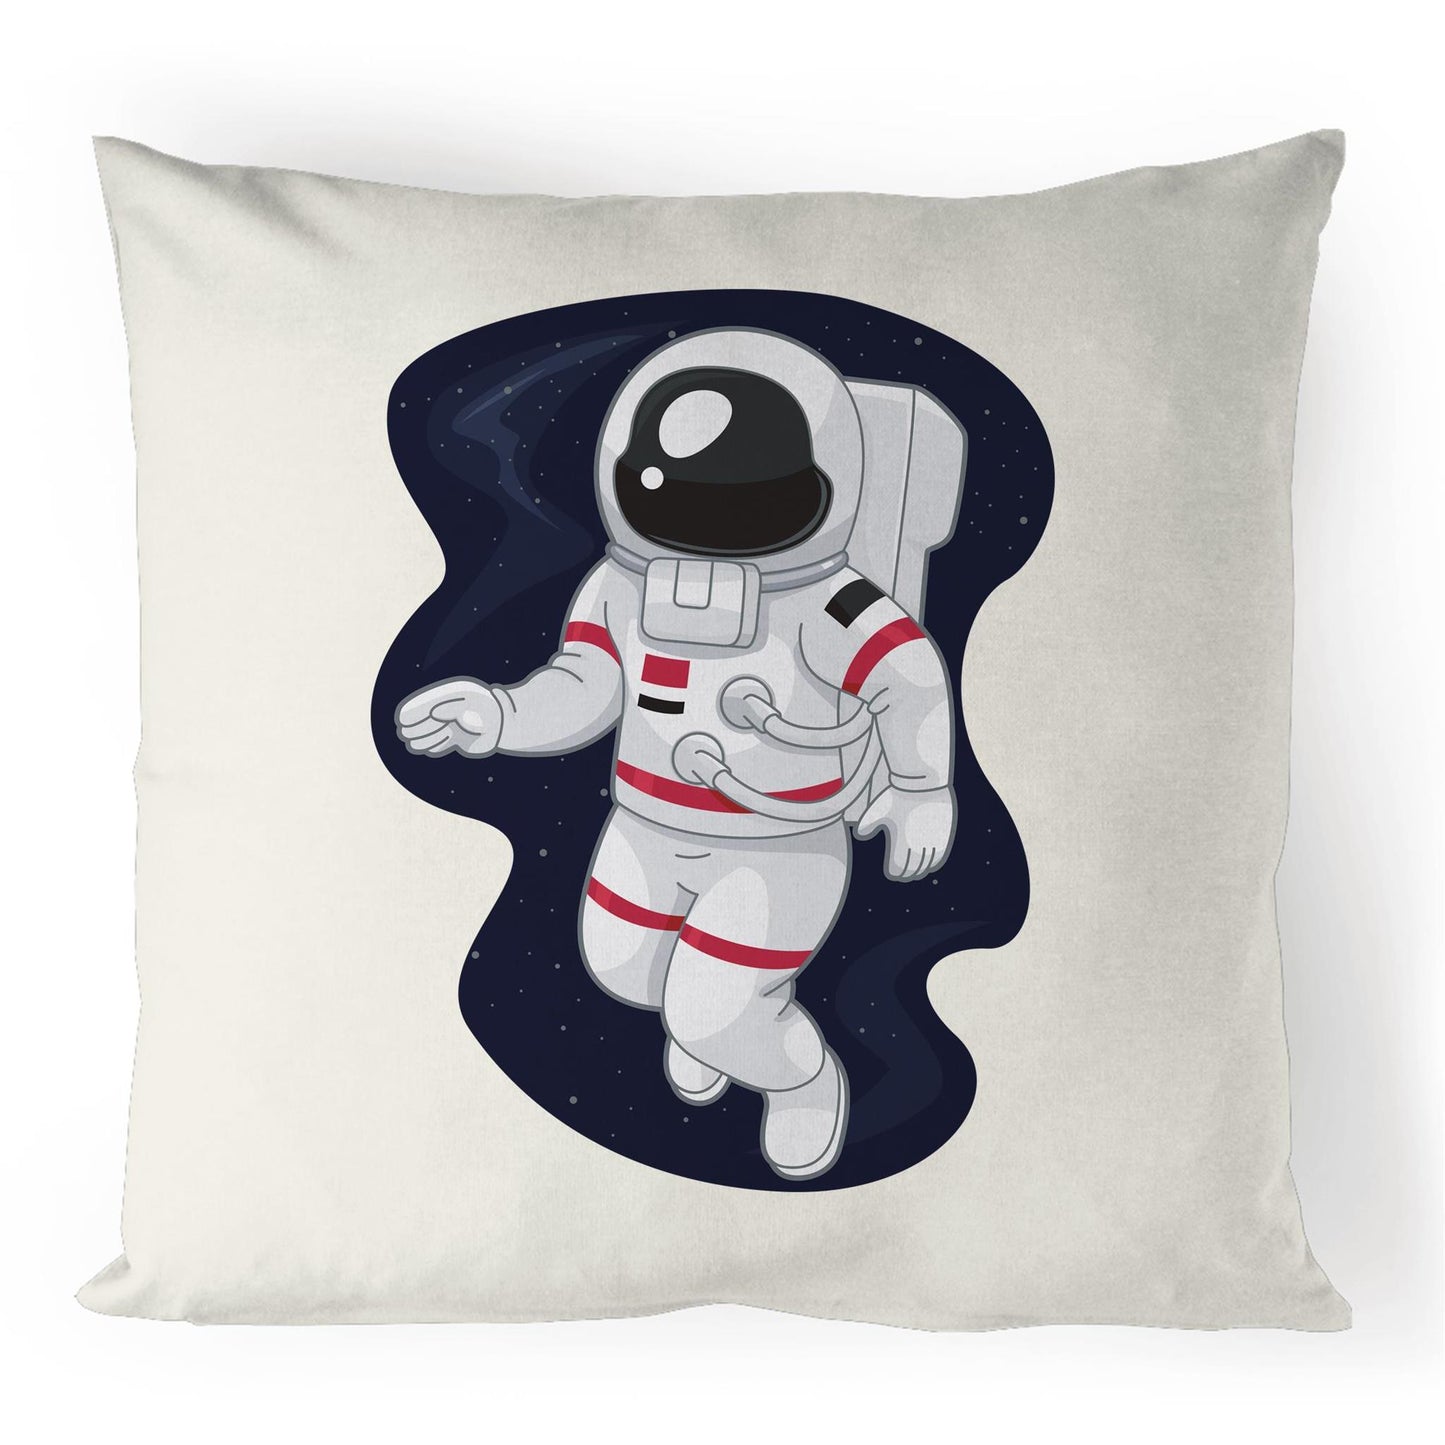 Astronaut - 100% Linen Cushion Cover Natural One-Size Linen Cushion Cover Space